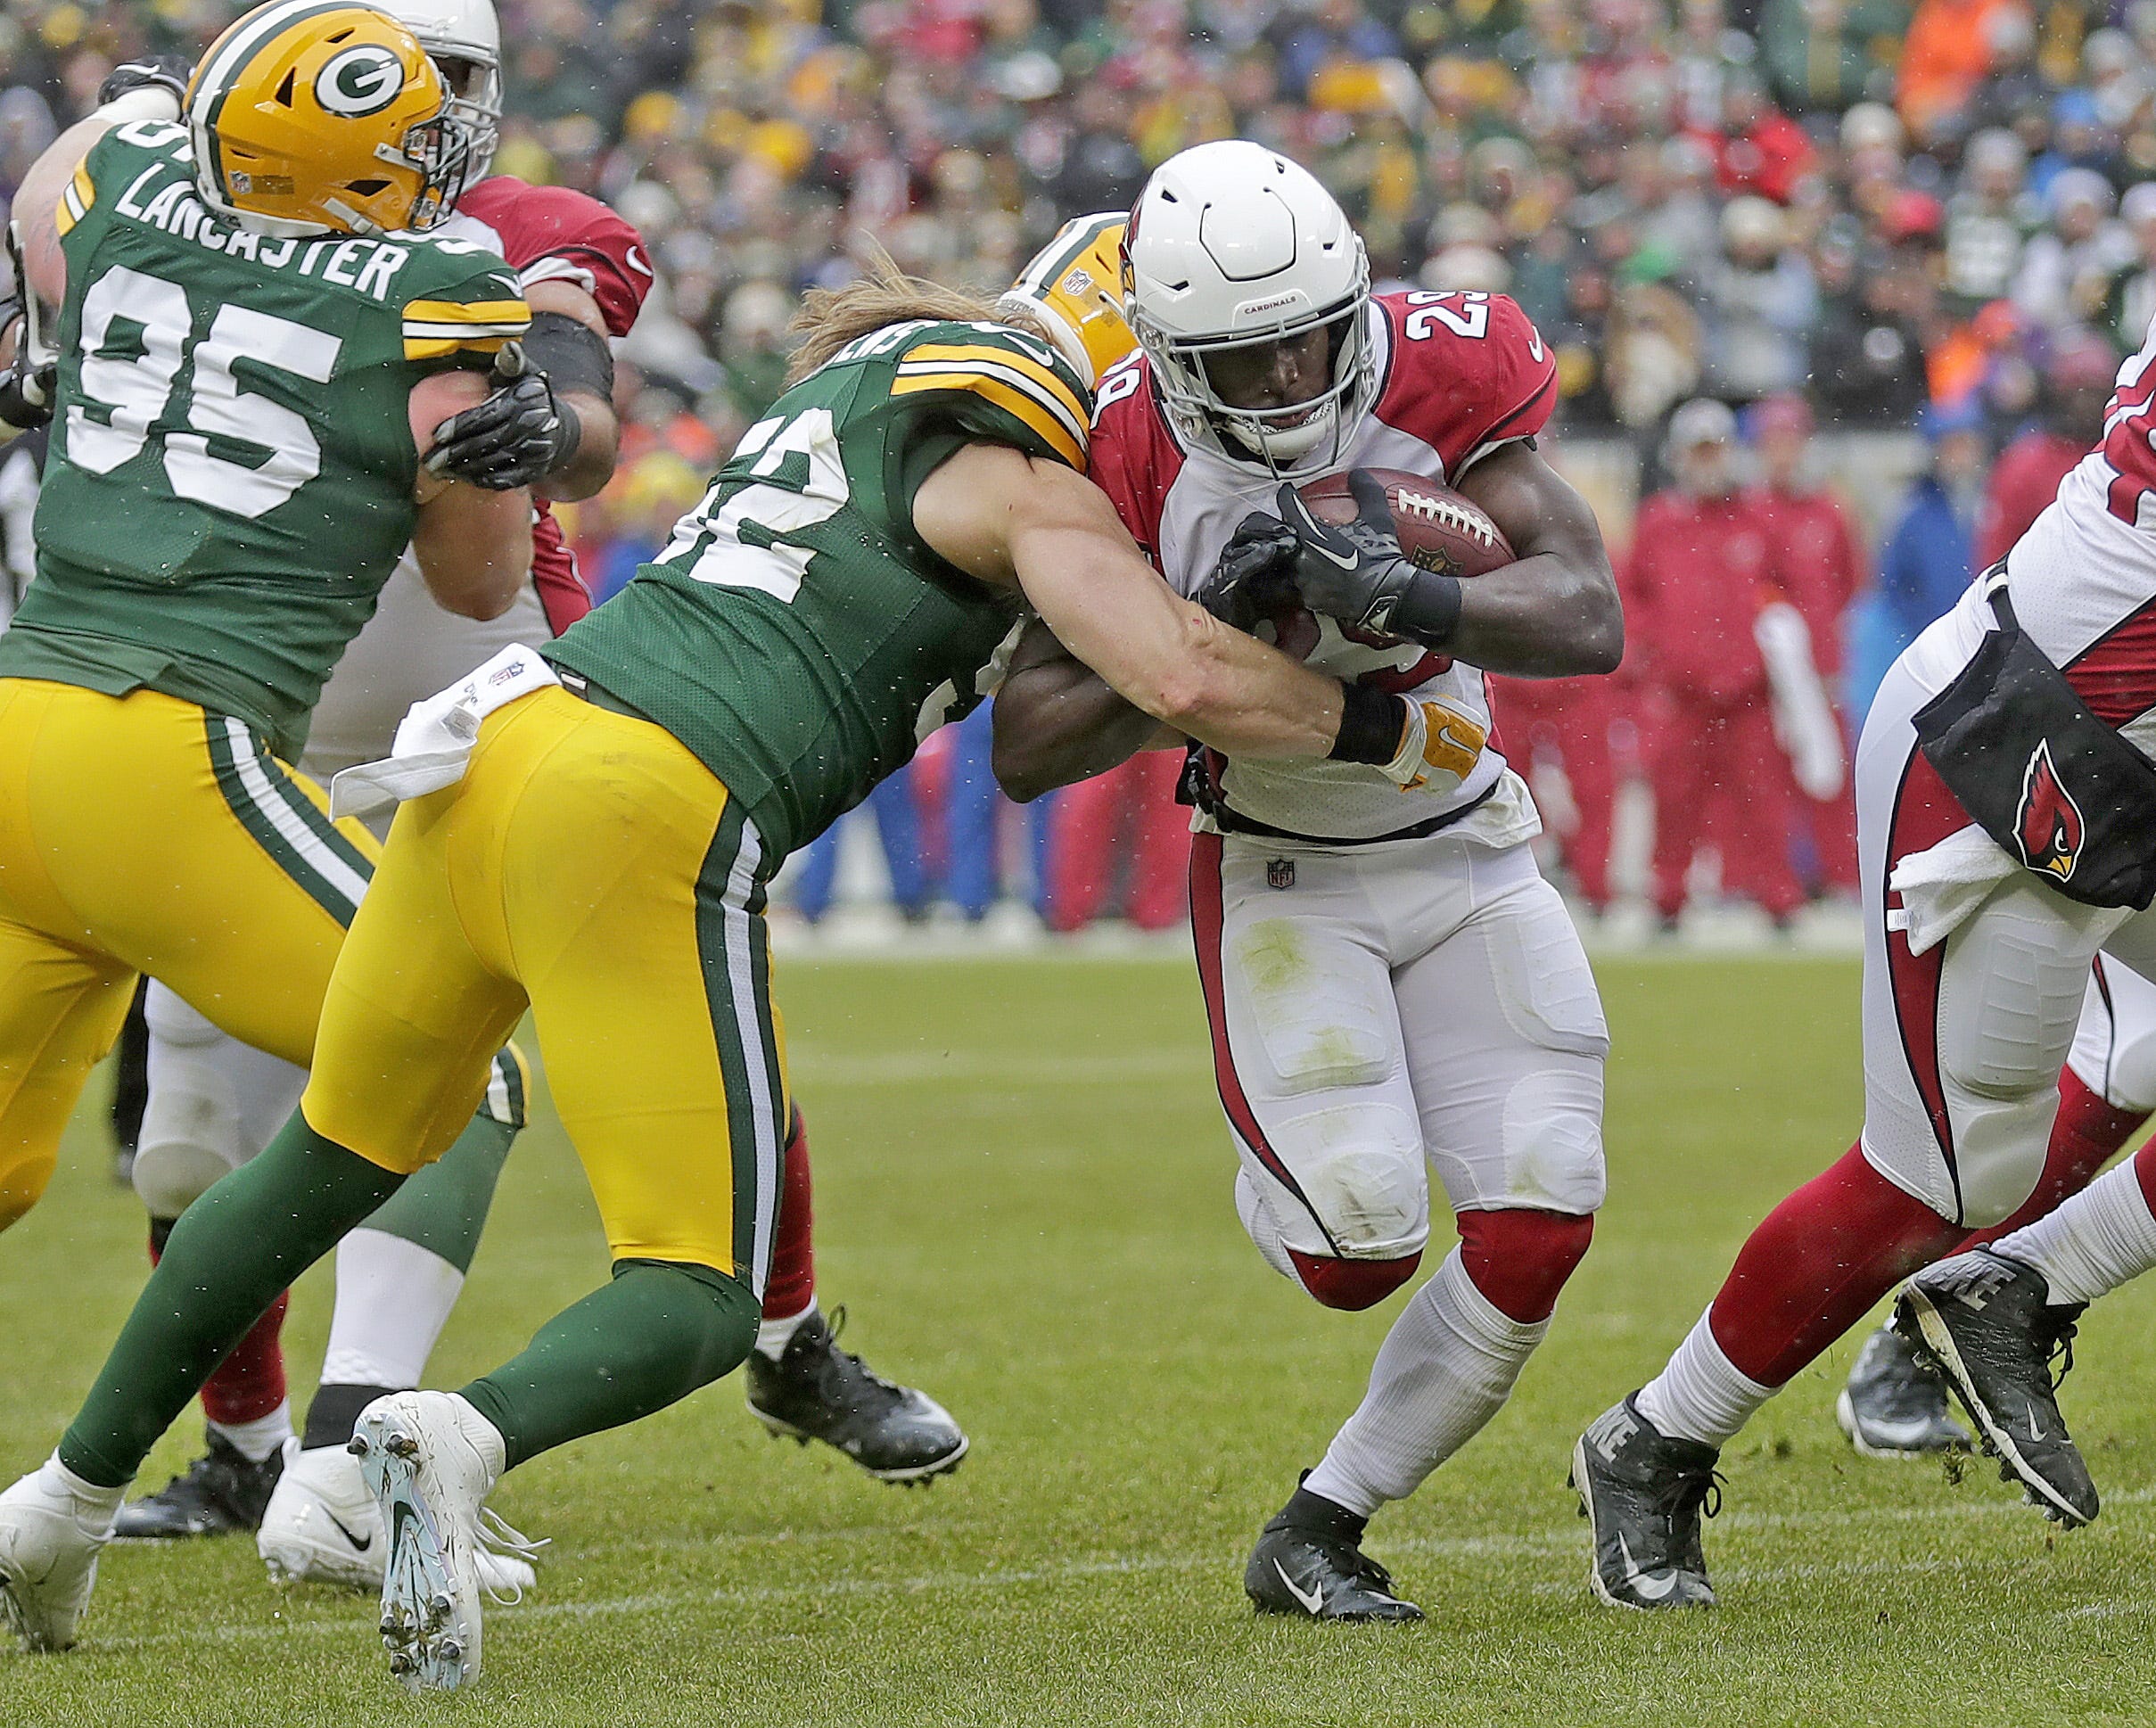 Green Bay Packers outside linebacker Clay Matthews (52) hits but can't stop running back Chase Edmonds (29) from scoring a touchdown in the second quarter against the Arizona Cardinals Sunday, December 2, 2018 at Lambeau Field in Green Bay, Wis.
Jim Matthews/USA TODAY NETWORK-Wis